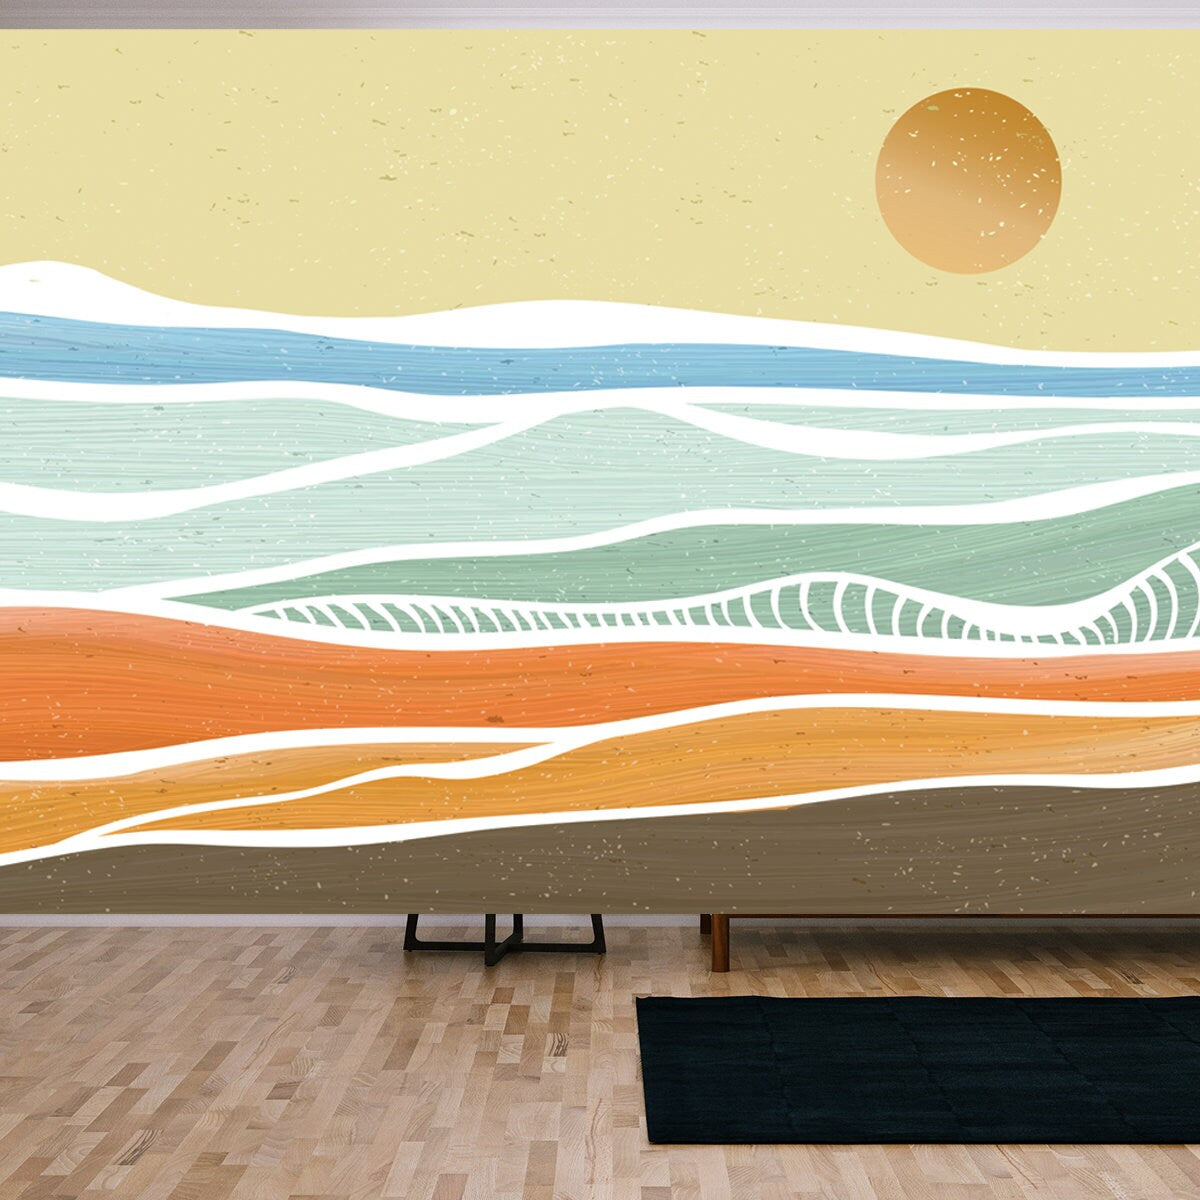 Creative Minimalist Modern Paint and Line Art Print. Abstract Ocean Wave and Mountain Contemporary Aesthetic Wallpaper Living Room Mural